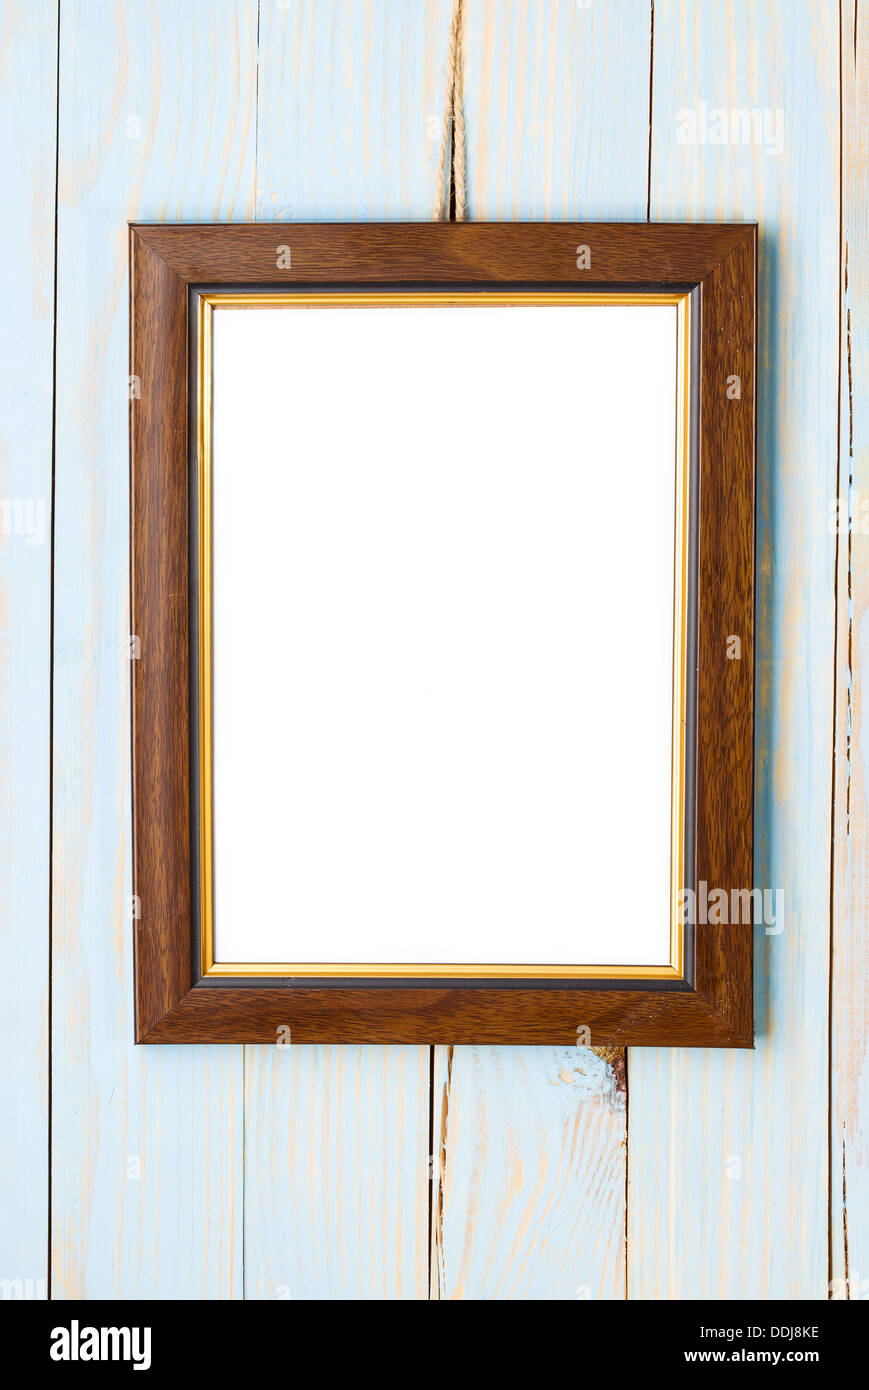 Wooden picture frame on a wooden blue background Stock Photo